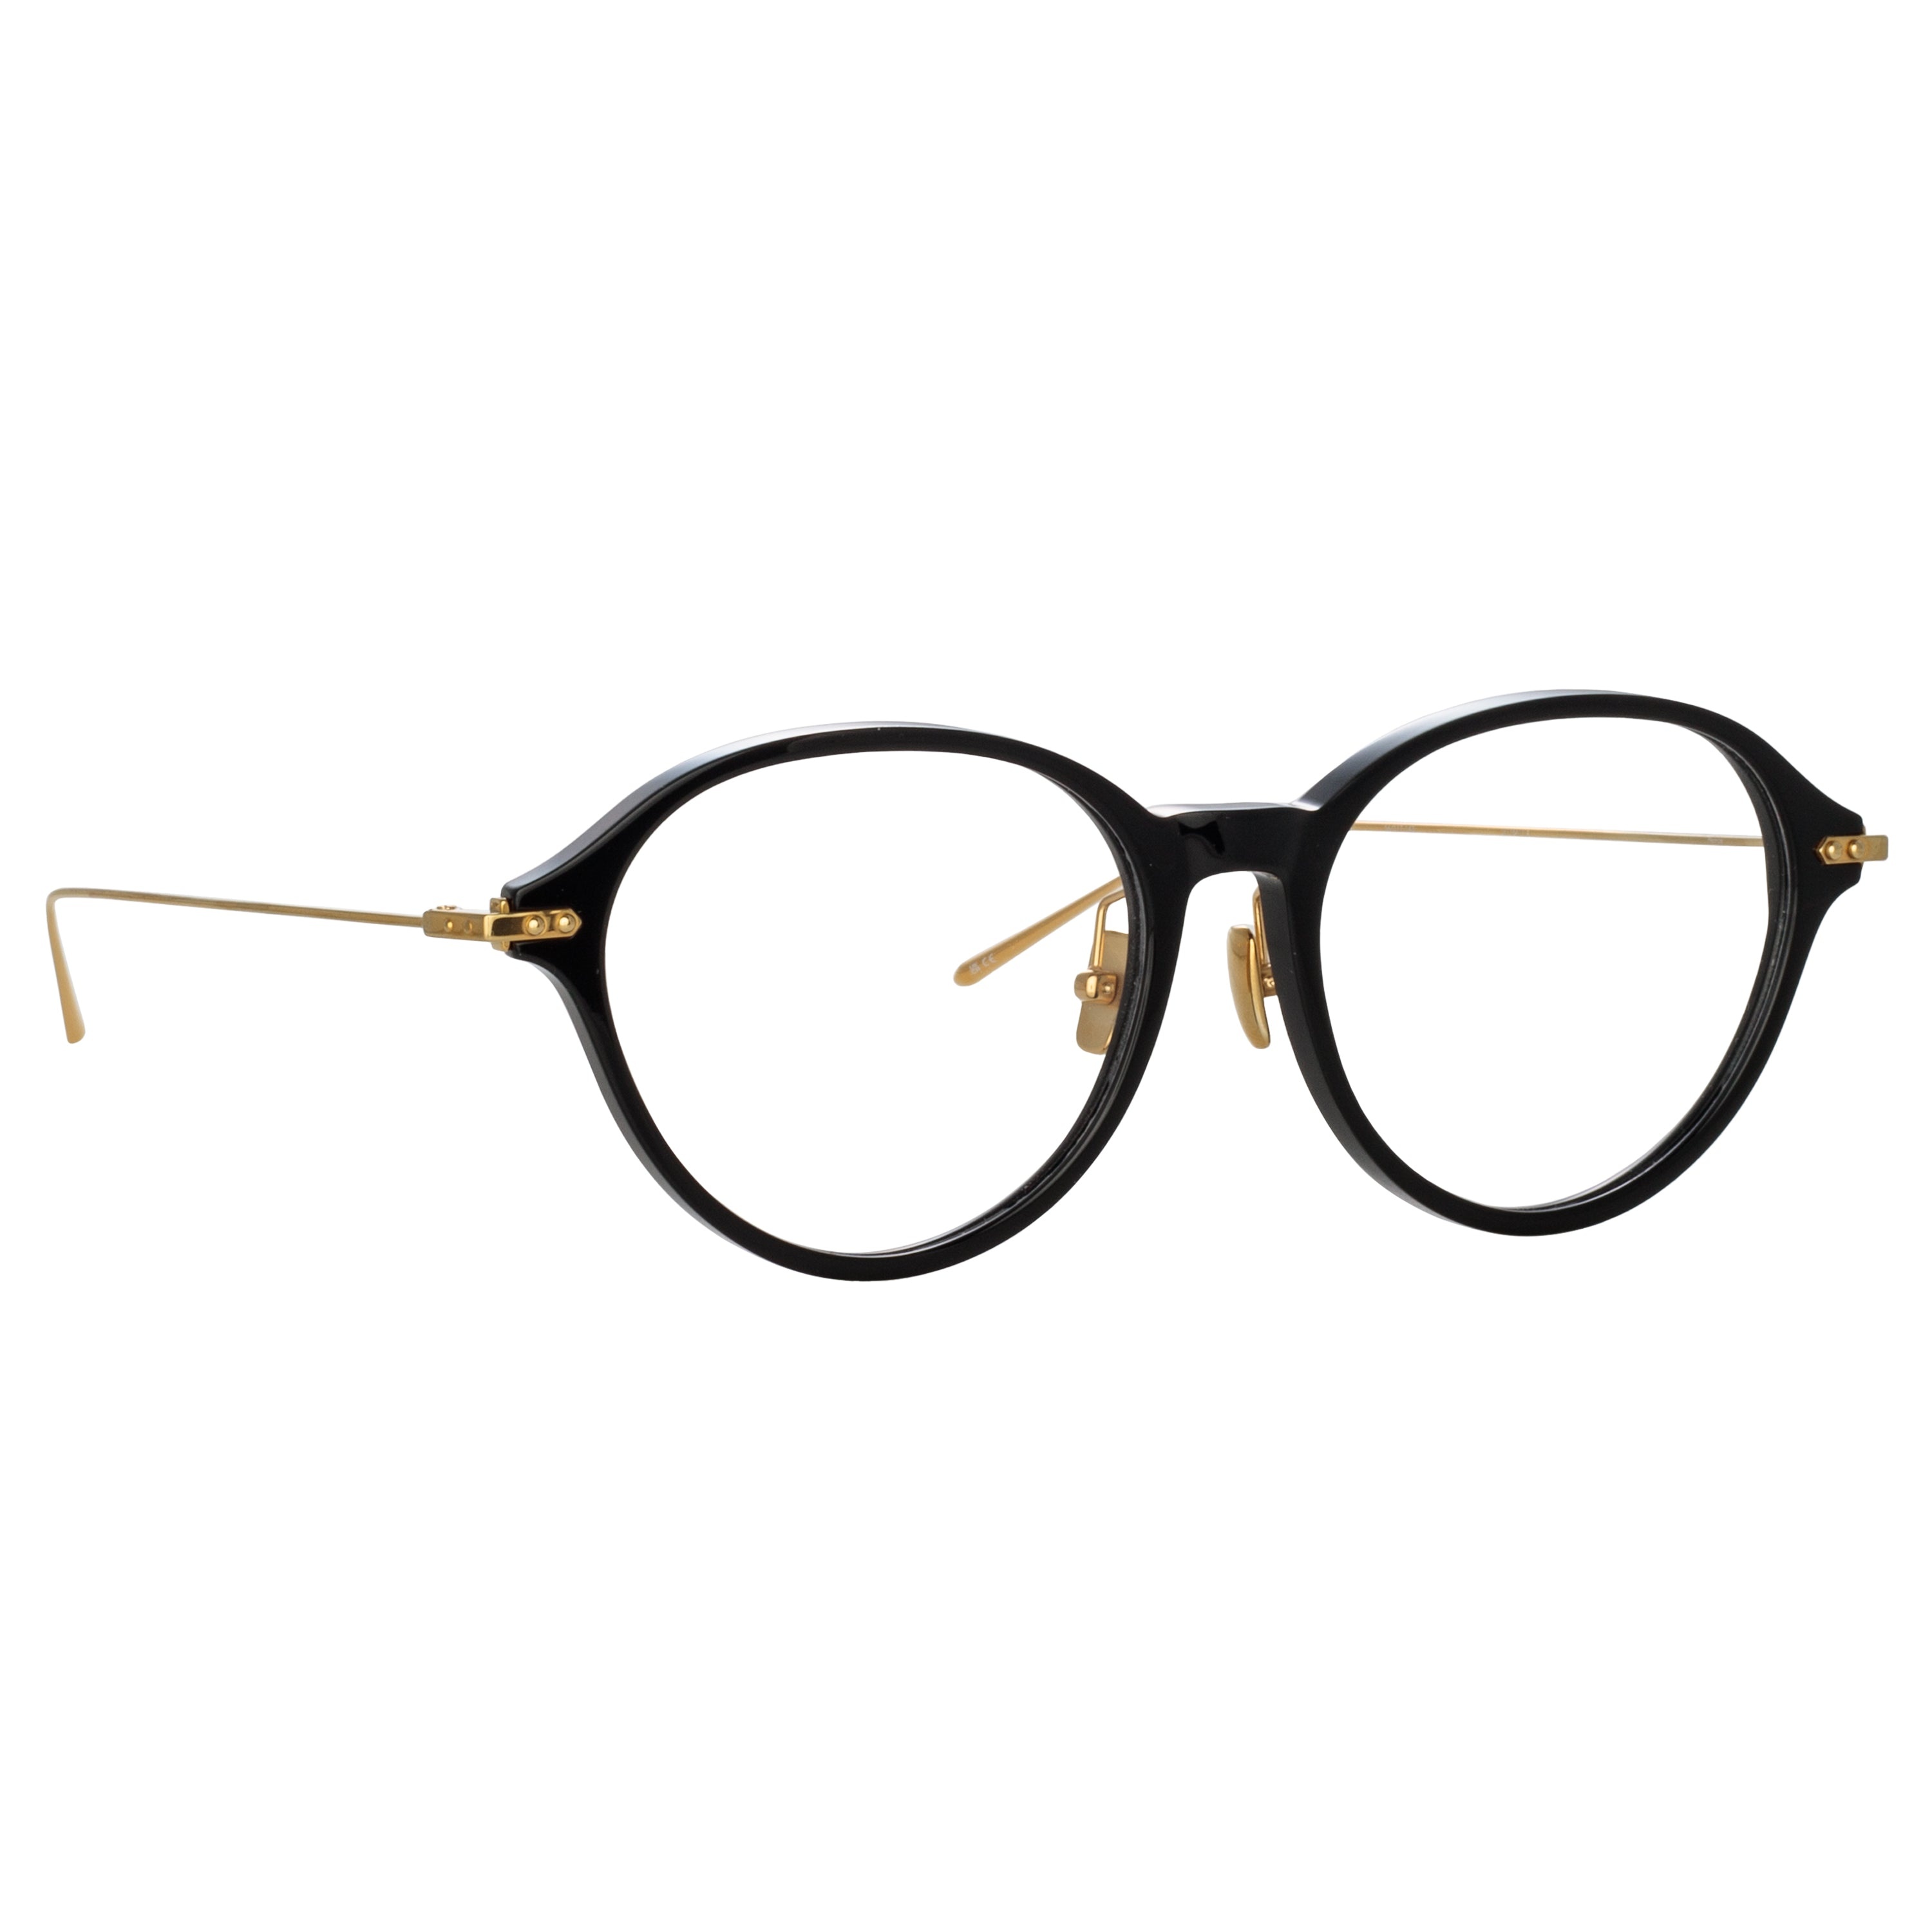 PEARCE OVAL OPTICAL FRAME IN BLACK (ASIAN FIT) - 3